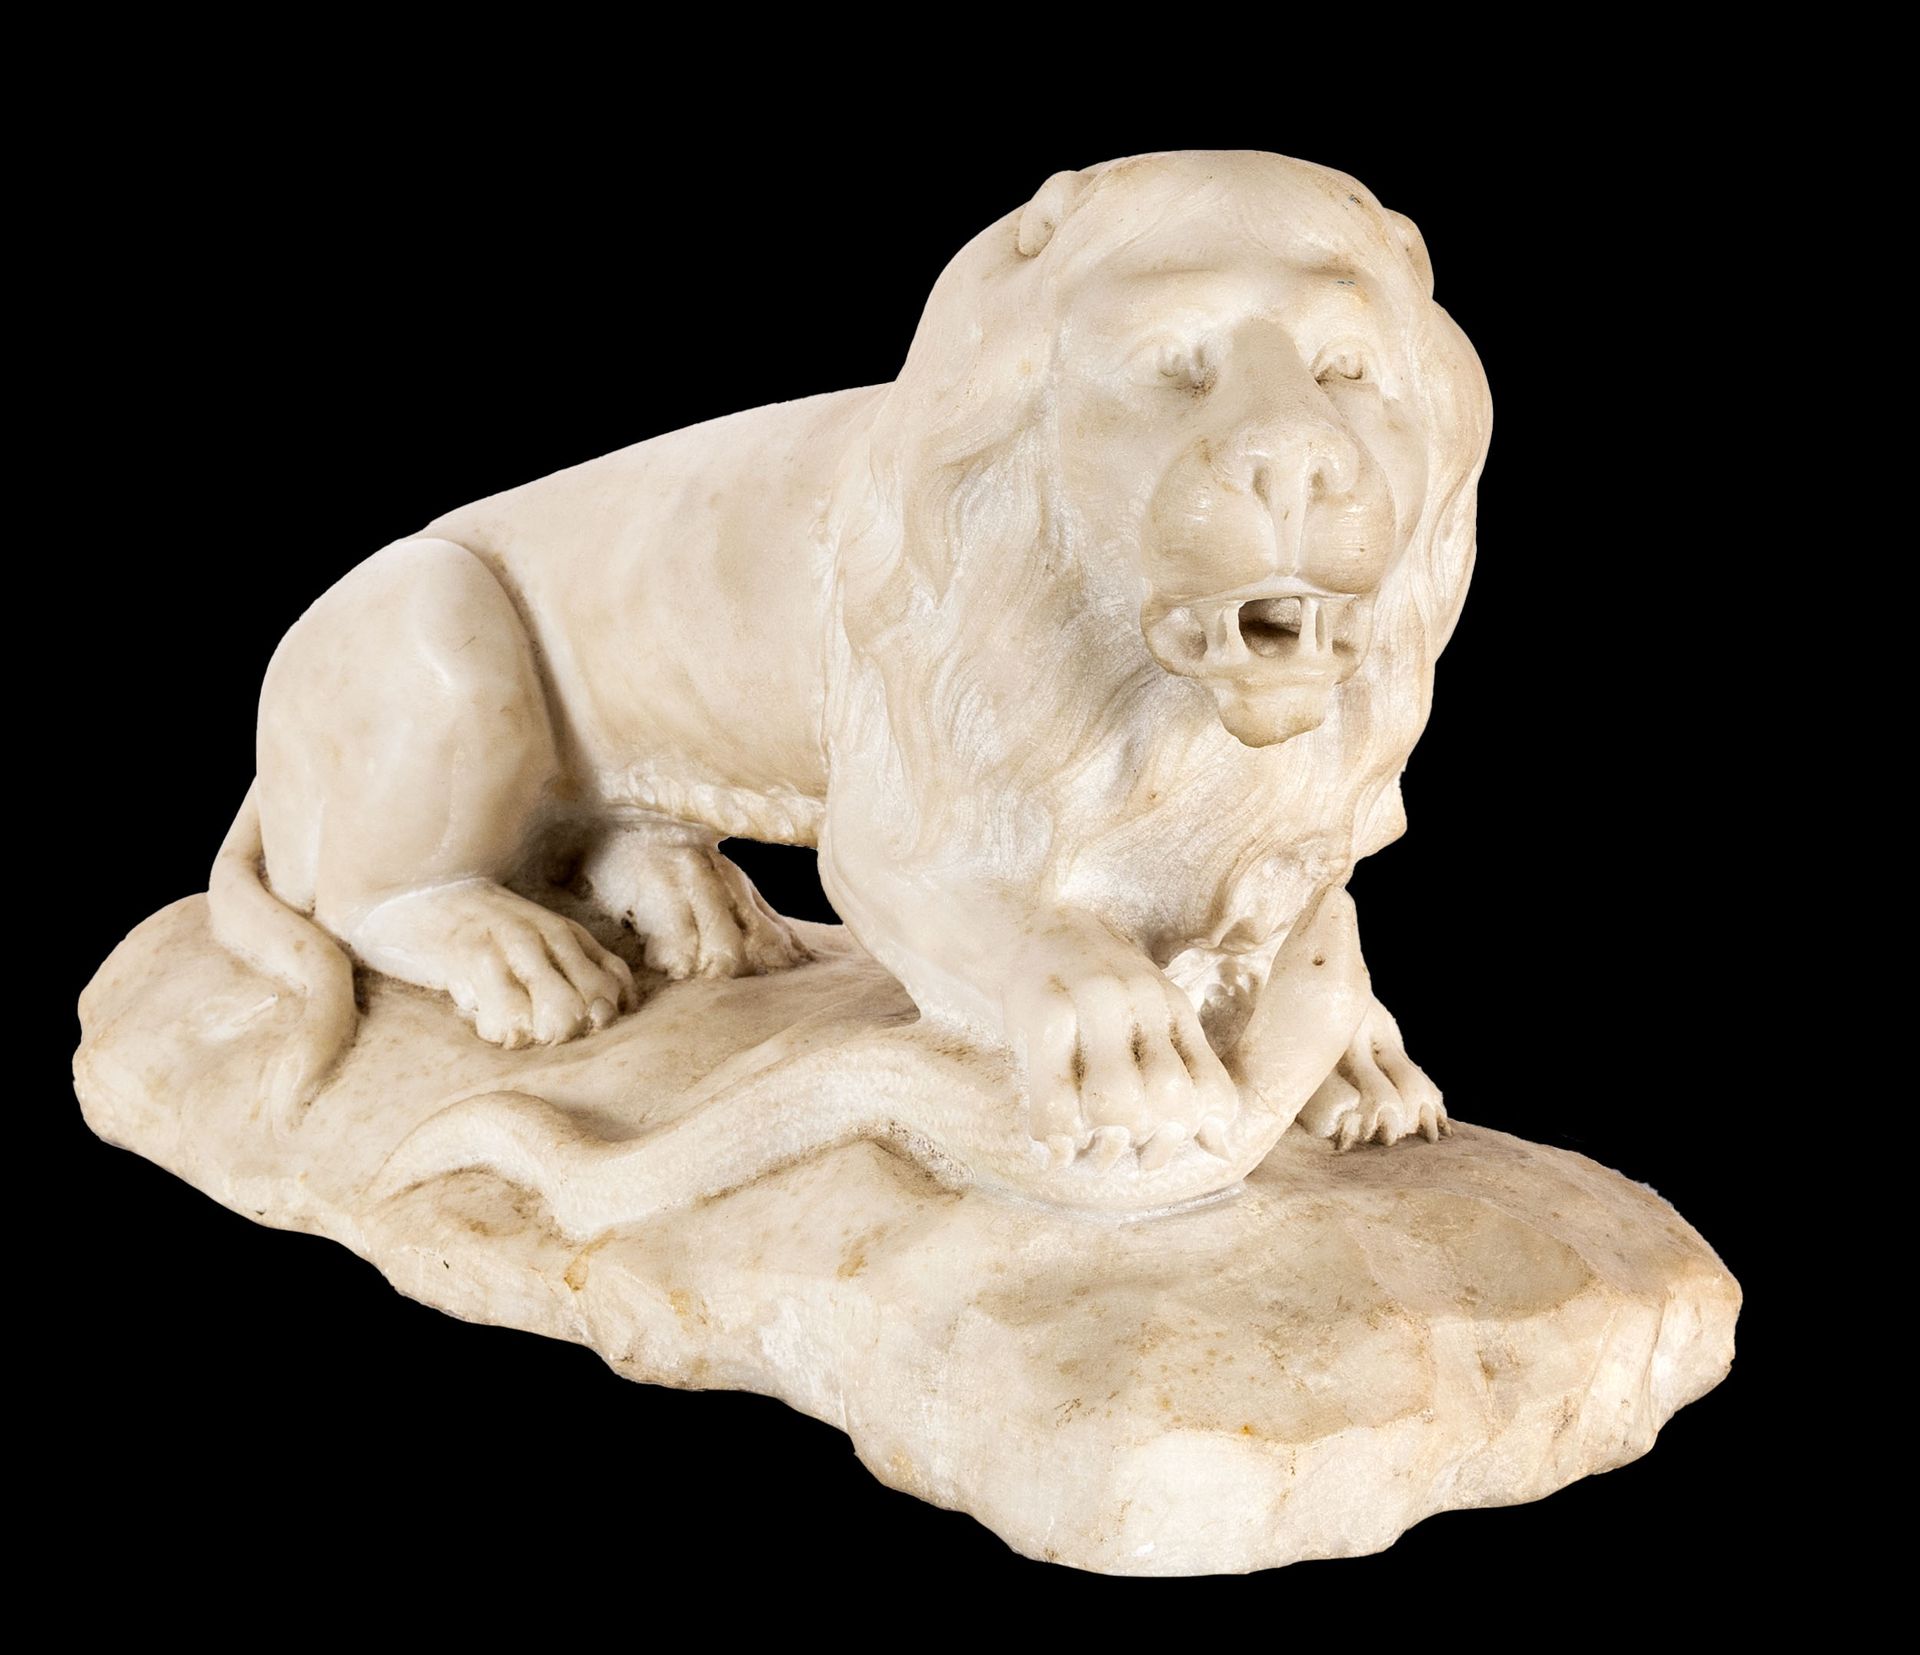 Null Sculptor of the XIX century - Lying lion

Marble sculpture

37 x 24 x 16 cm